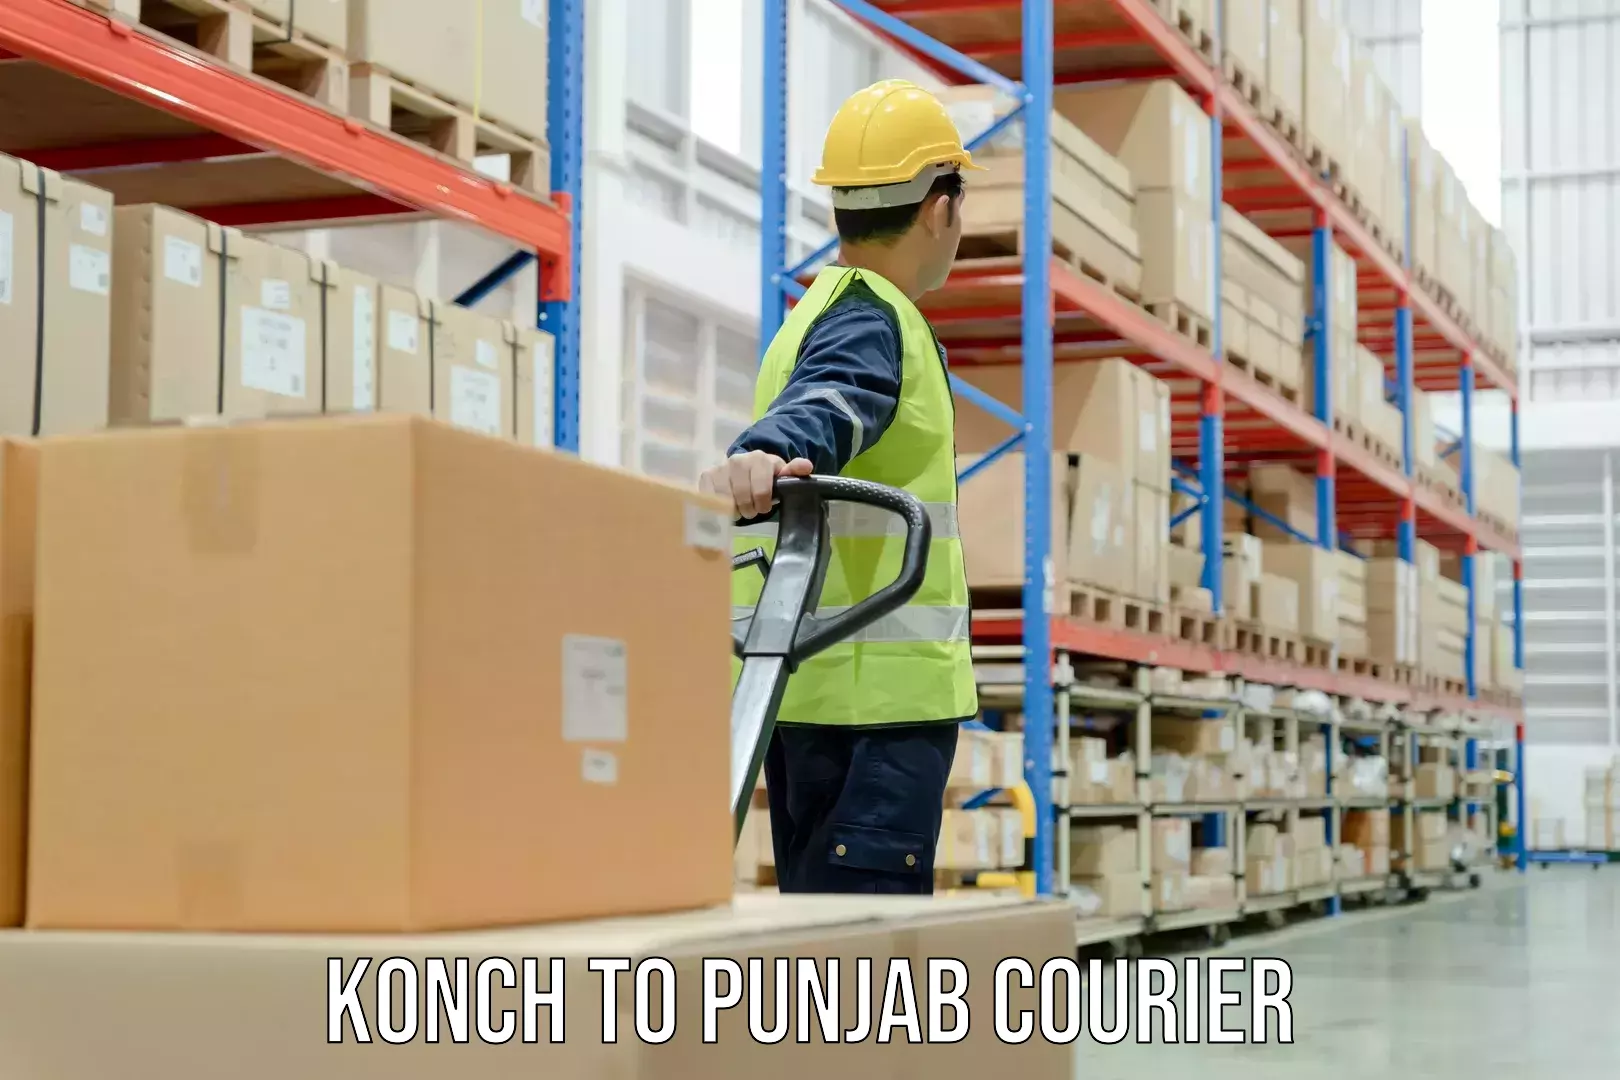 High-speed delivery Konch to Central University of Punjab Bathinda